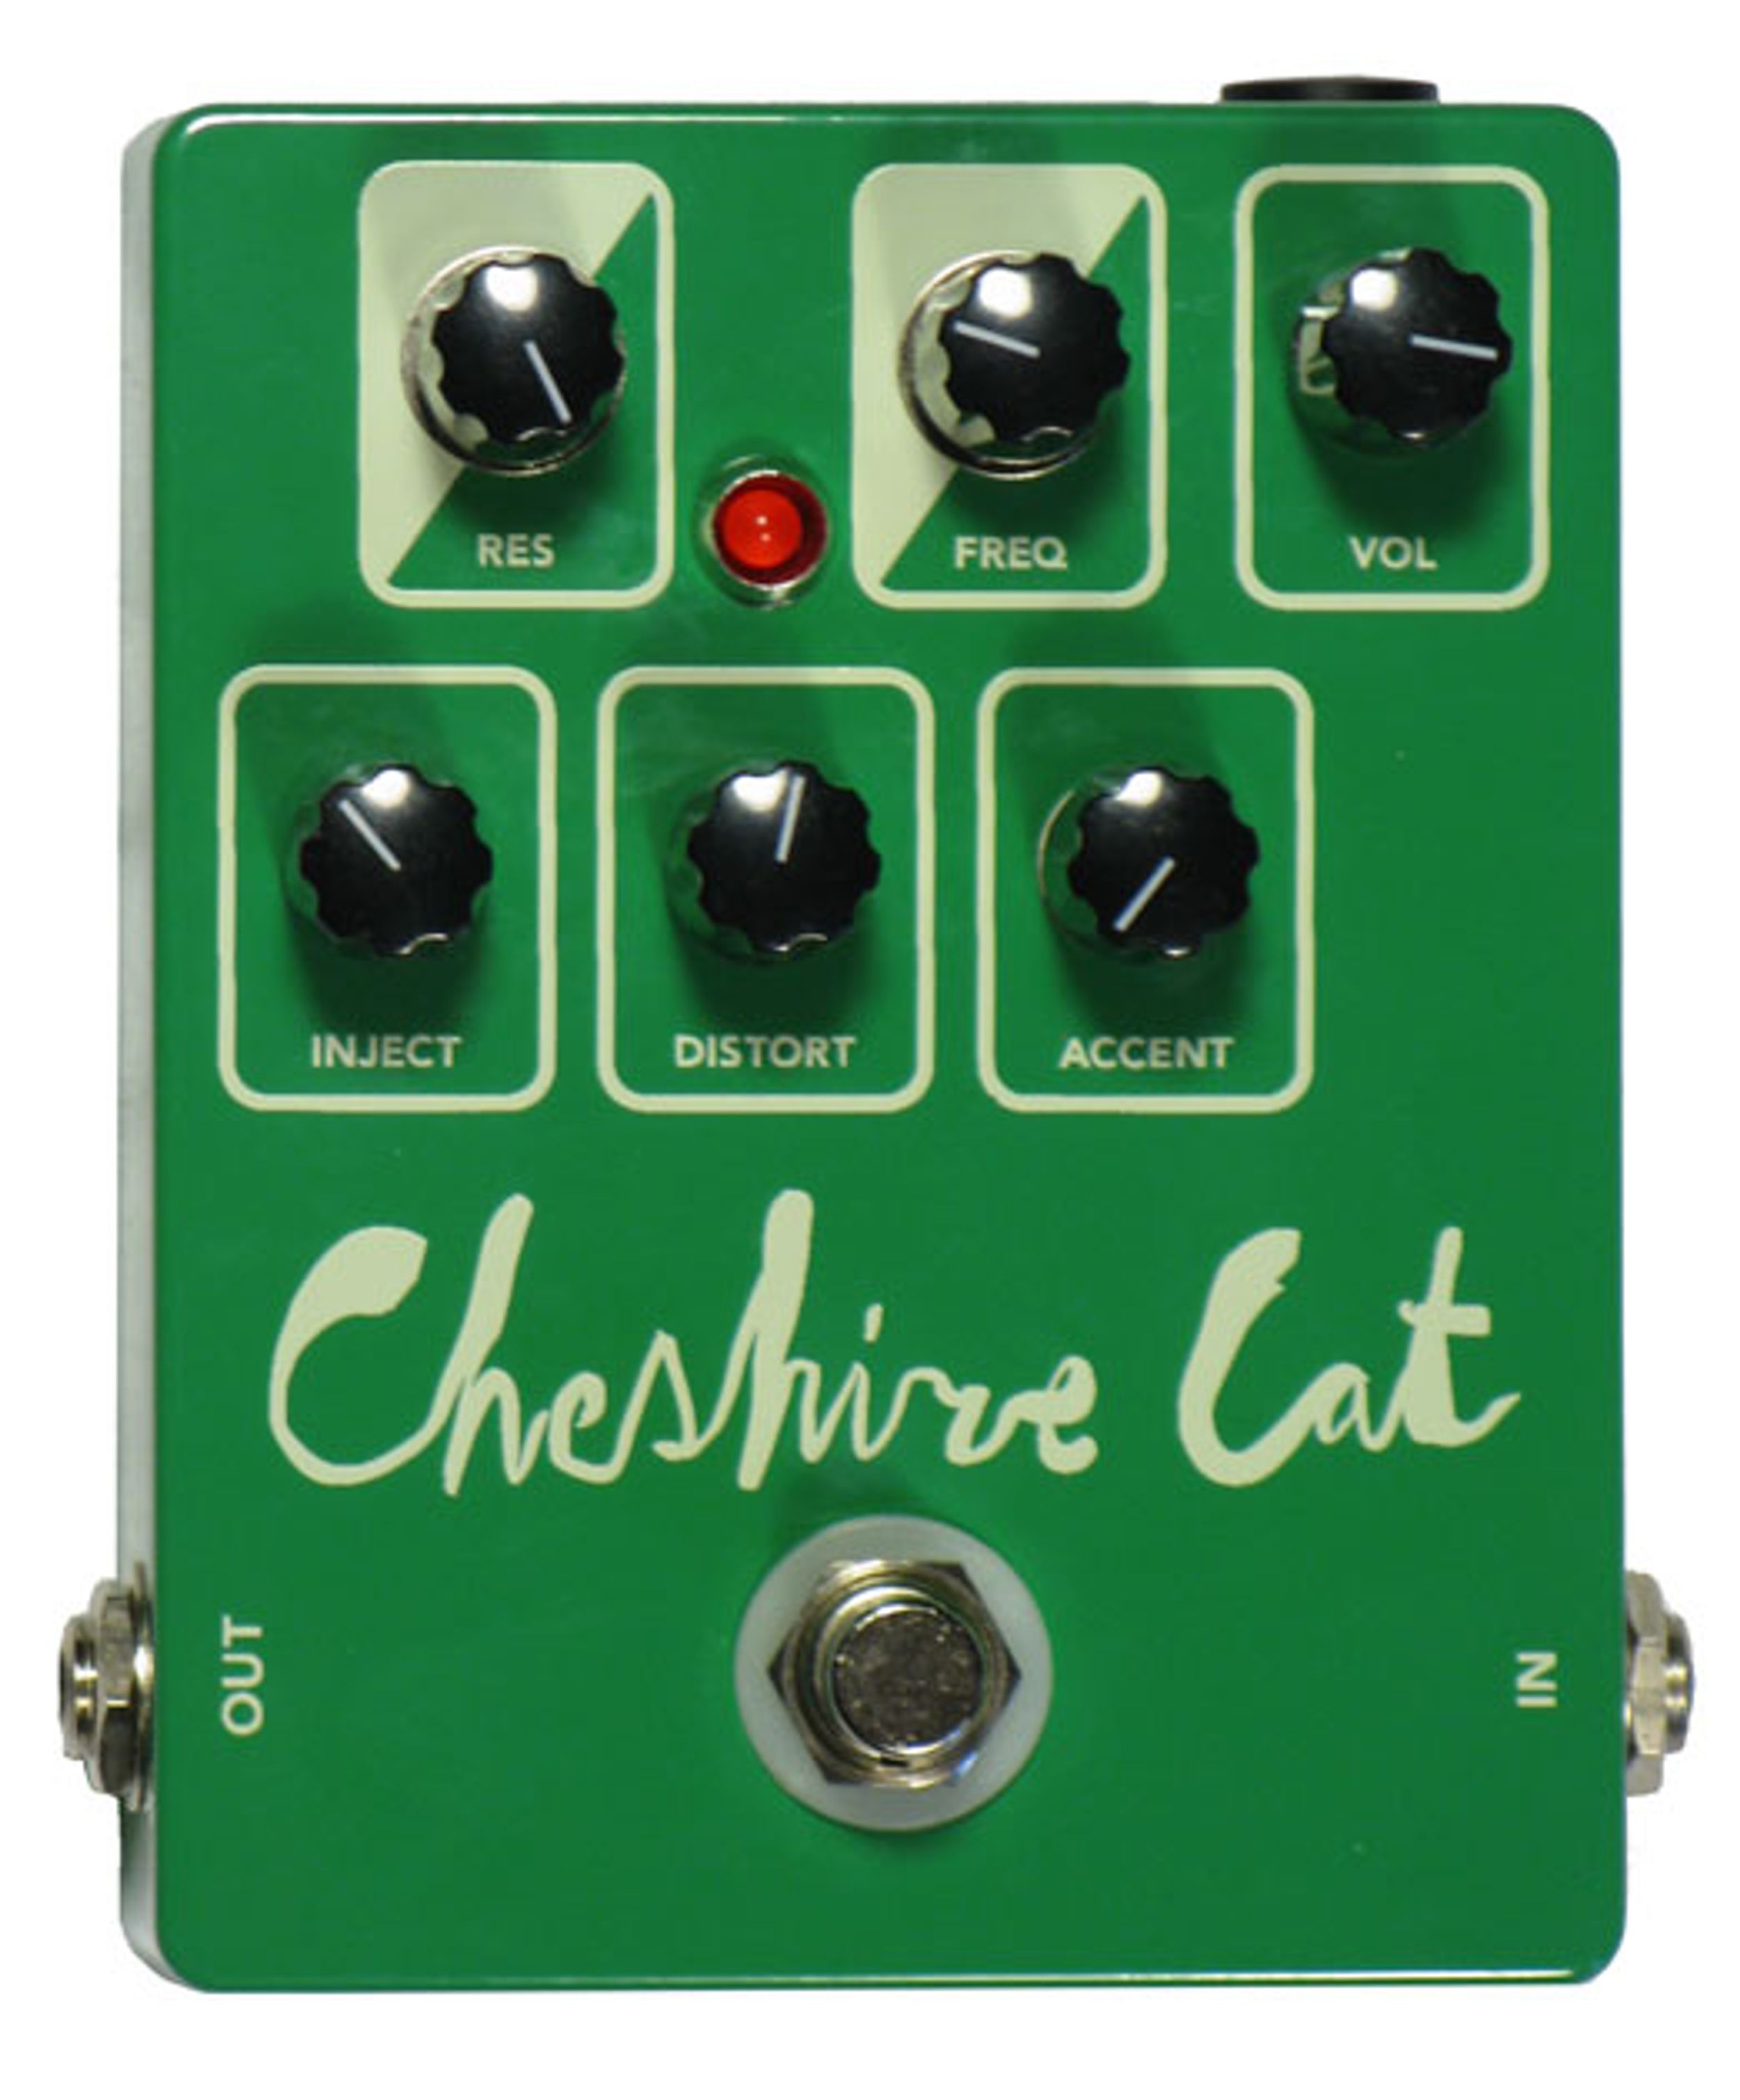 Amzel Electronics Releases the Cheshire Cat